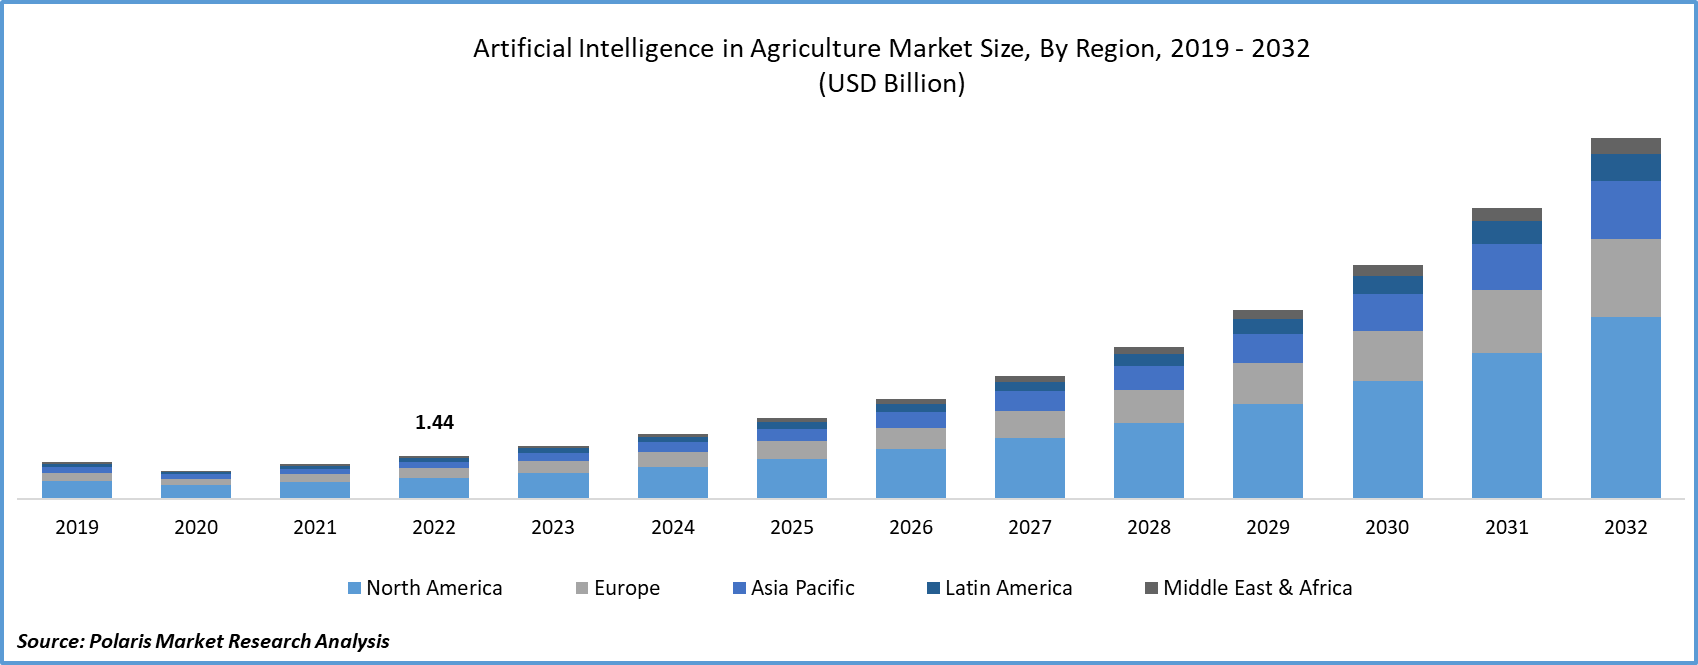 Artificial Intelligence in Agriculture Market Size